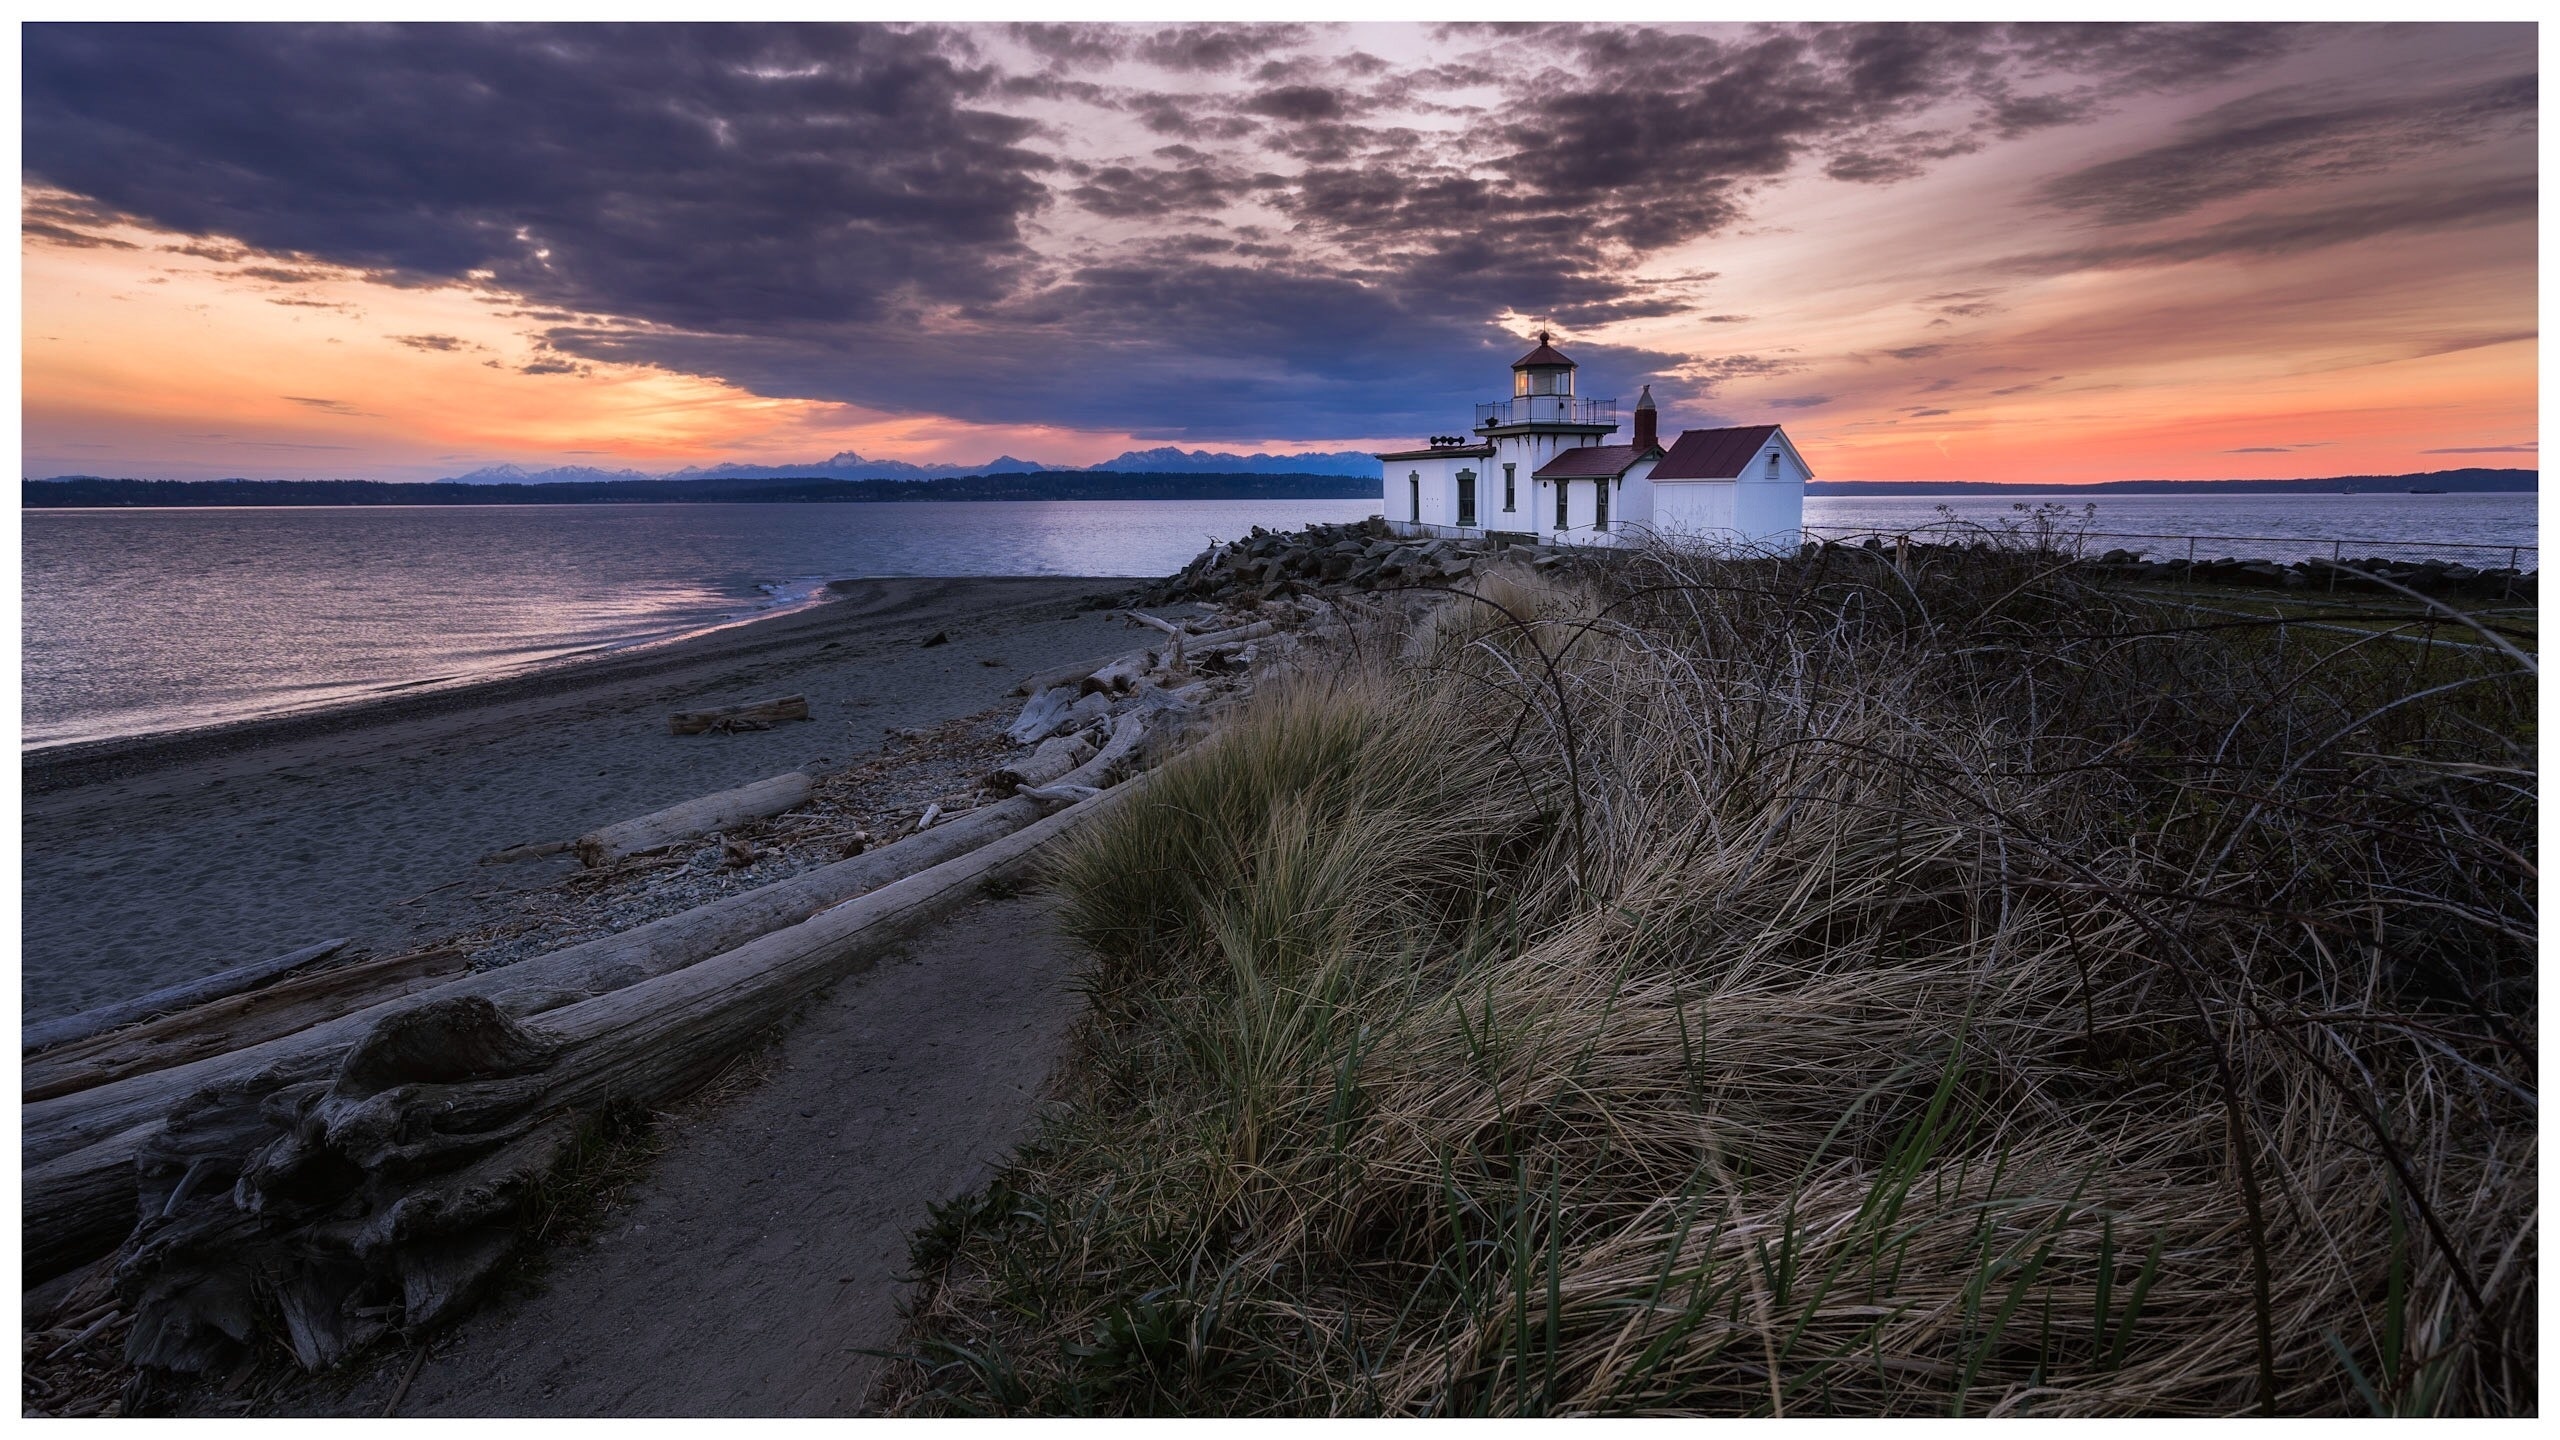 West Point Lighthouse at Discovery Park, Seattle 

#goldenhour #sunset #hiking #pnw #pacificnorthwest